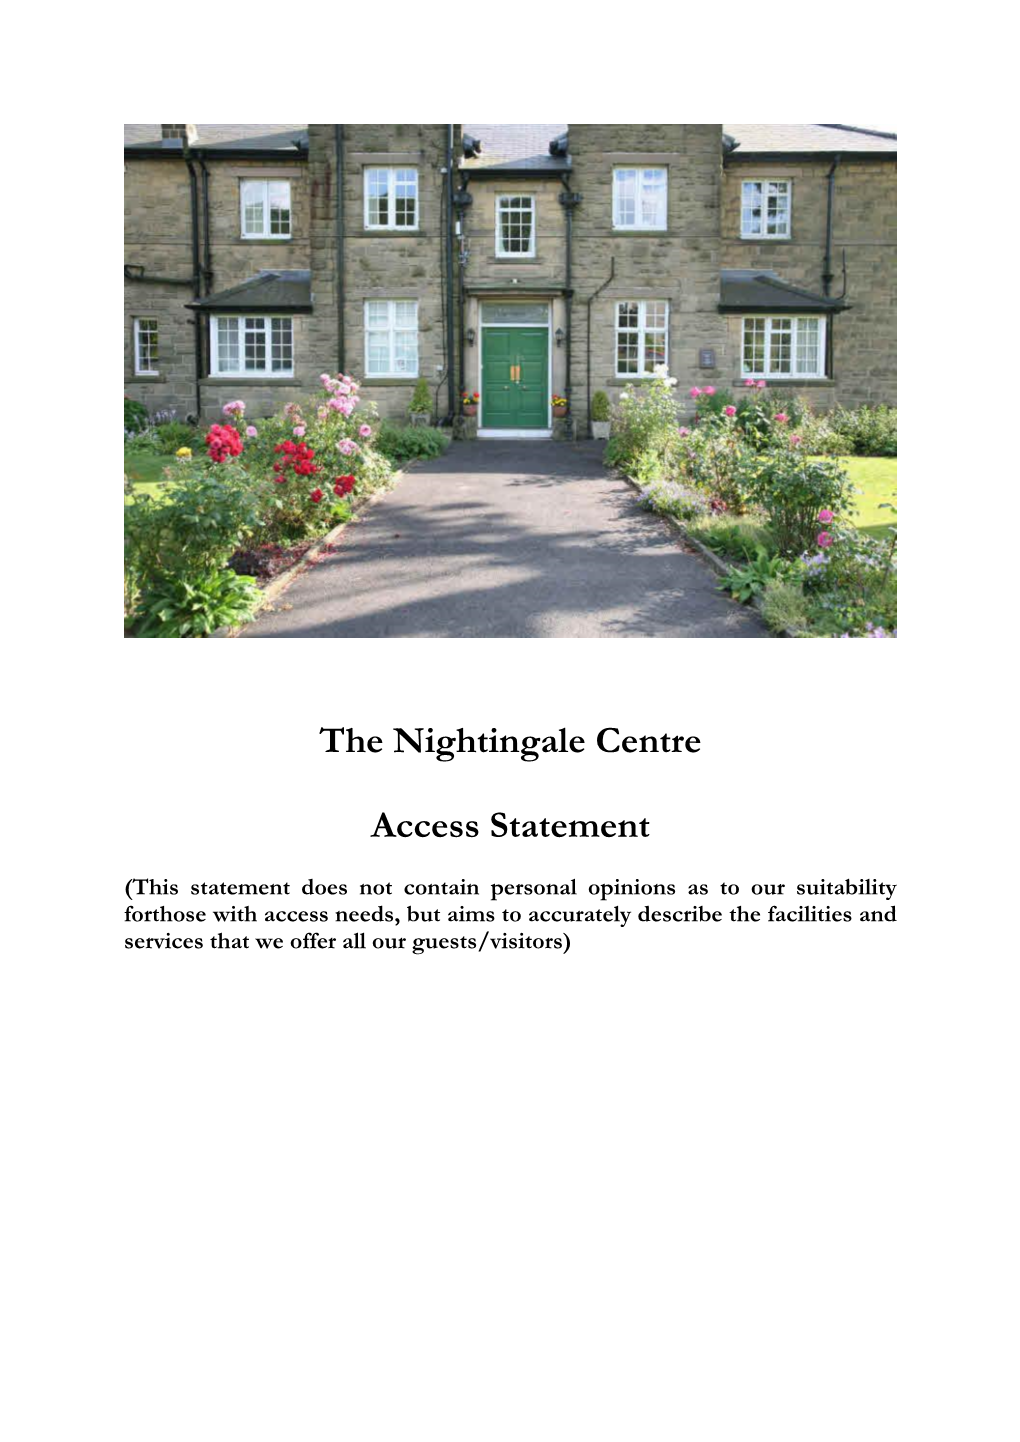 The Nightingale Centre Access Statement